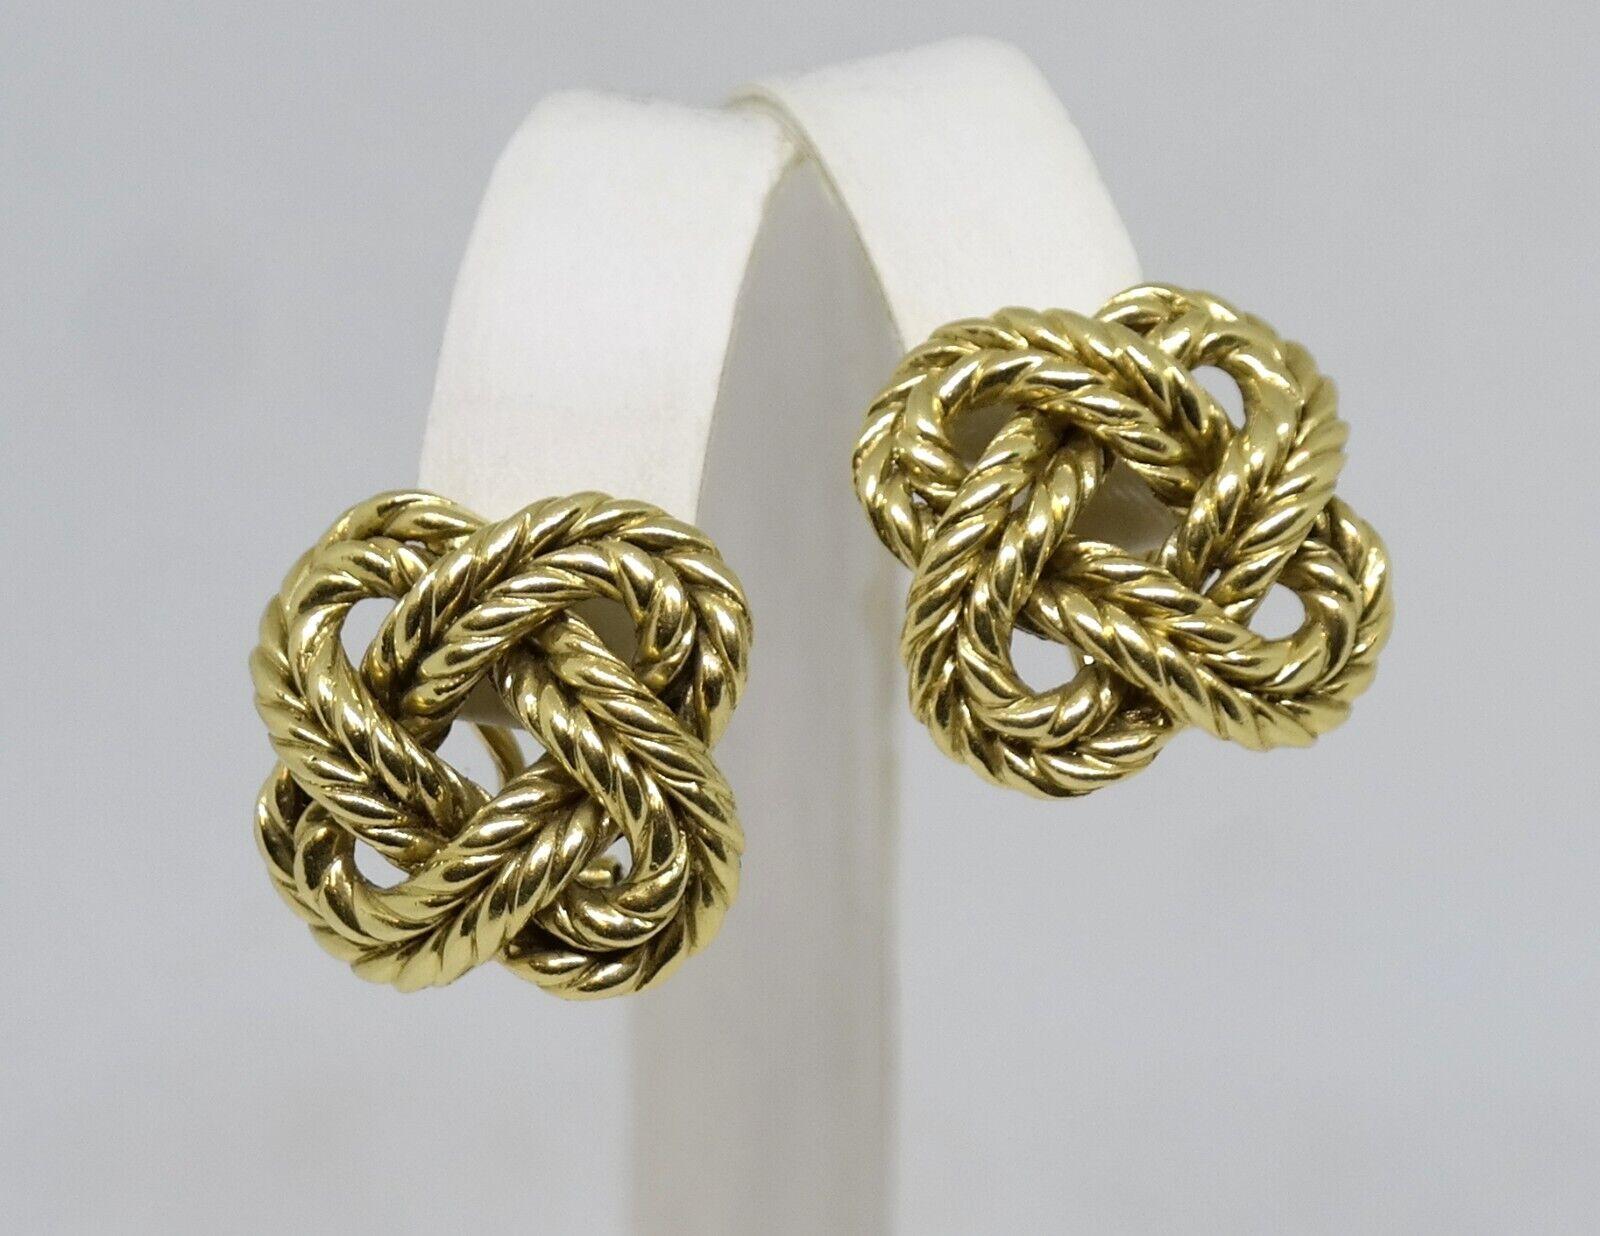 TIFFANY & CO. Italy 18k Yellow Gold Knot Motif Clip On Earrings Vintage 1970s For Sale 5